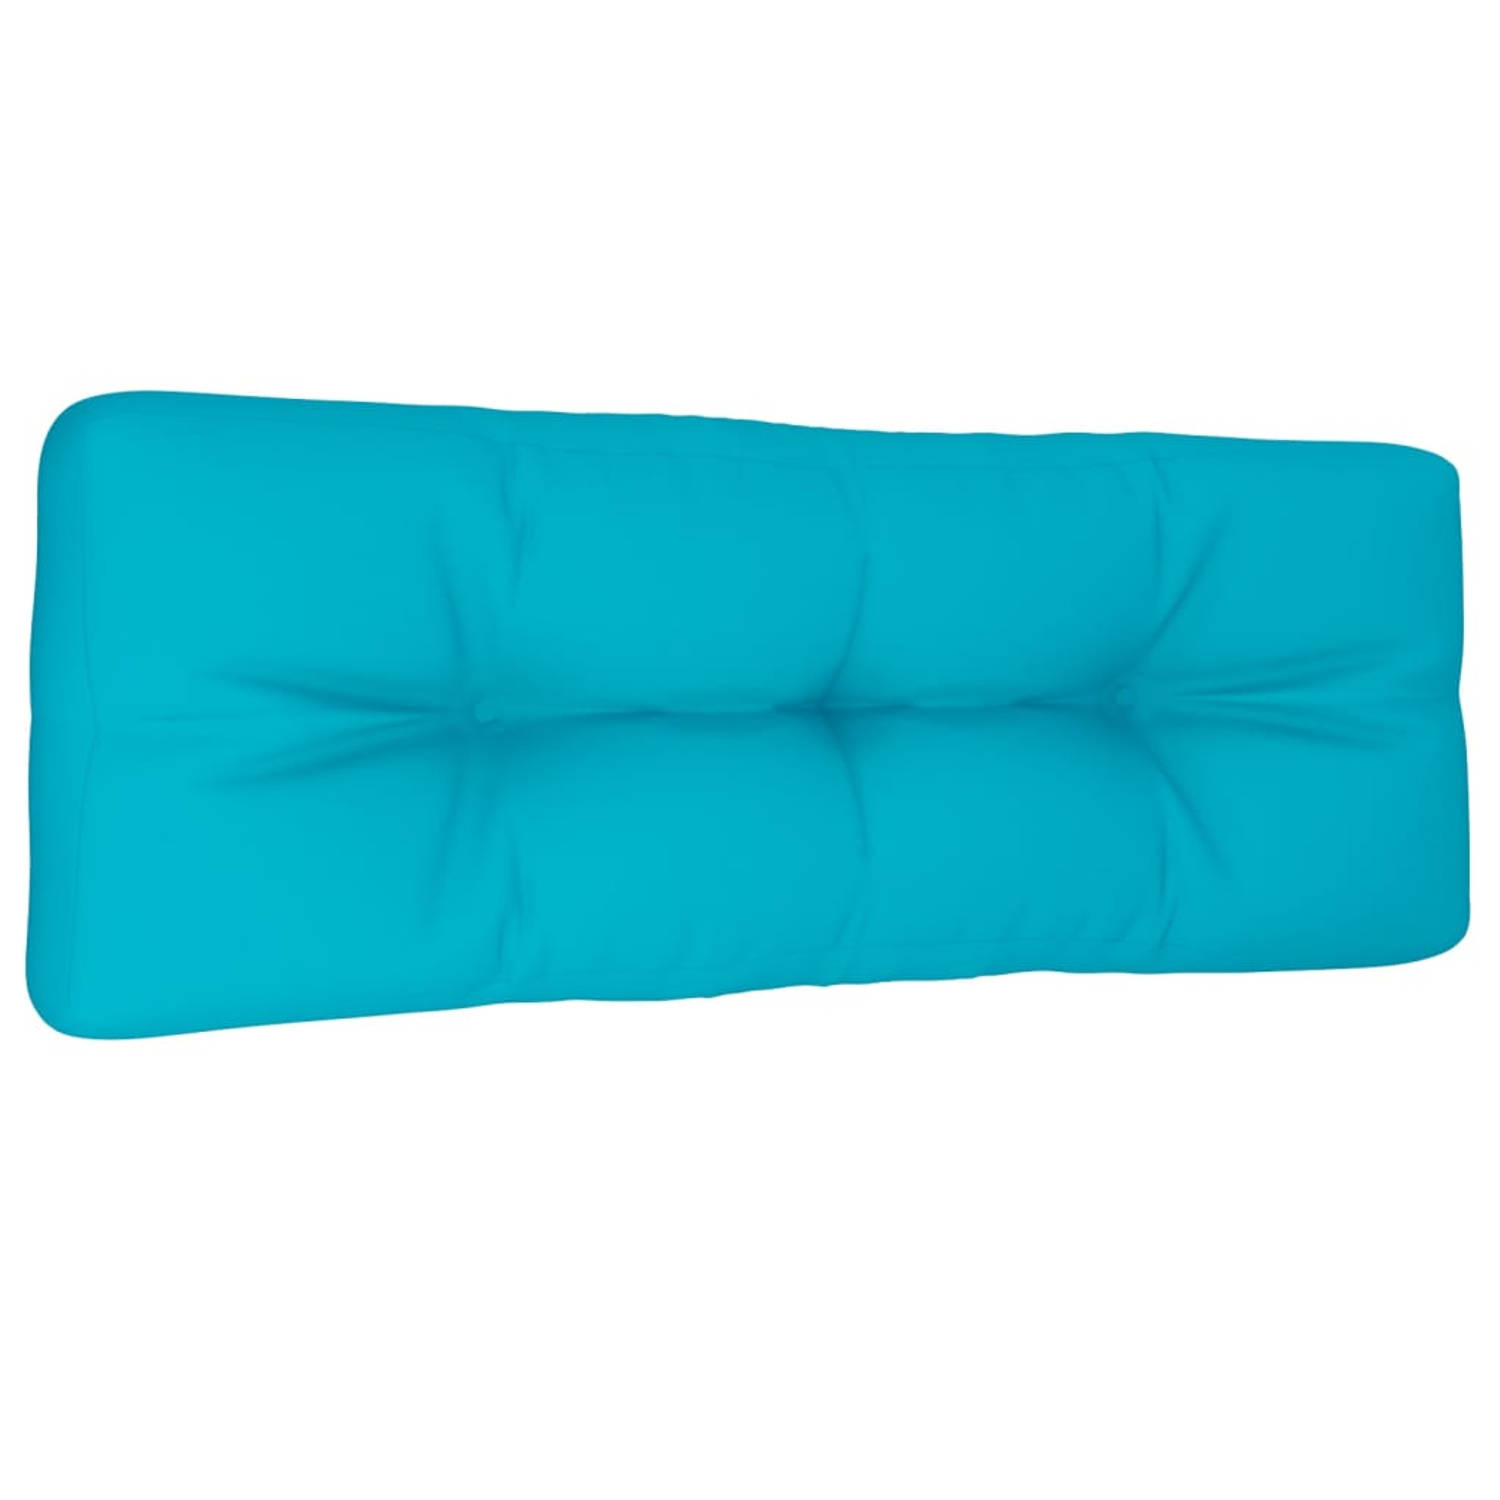 The Living Store Palletkussen - Turquoise - 120 x 40 x 12 cm - Polyester